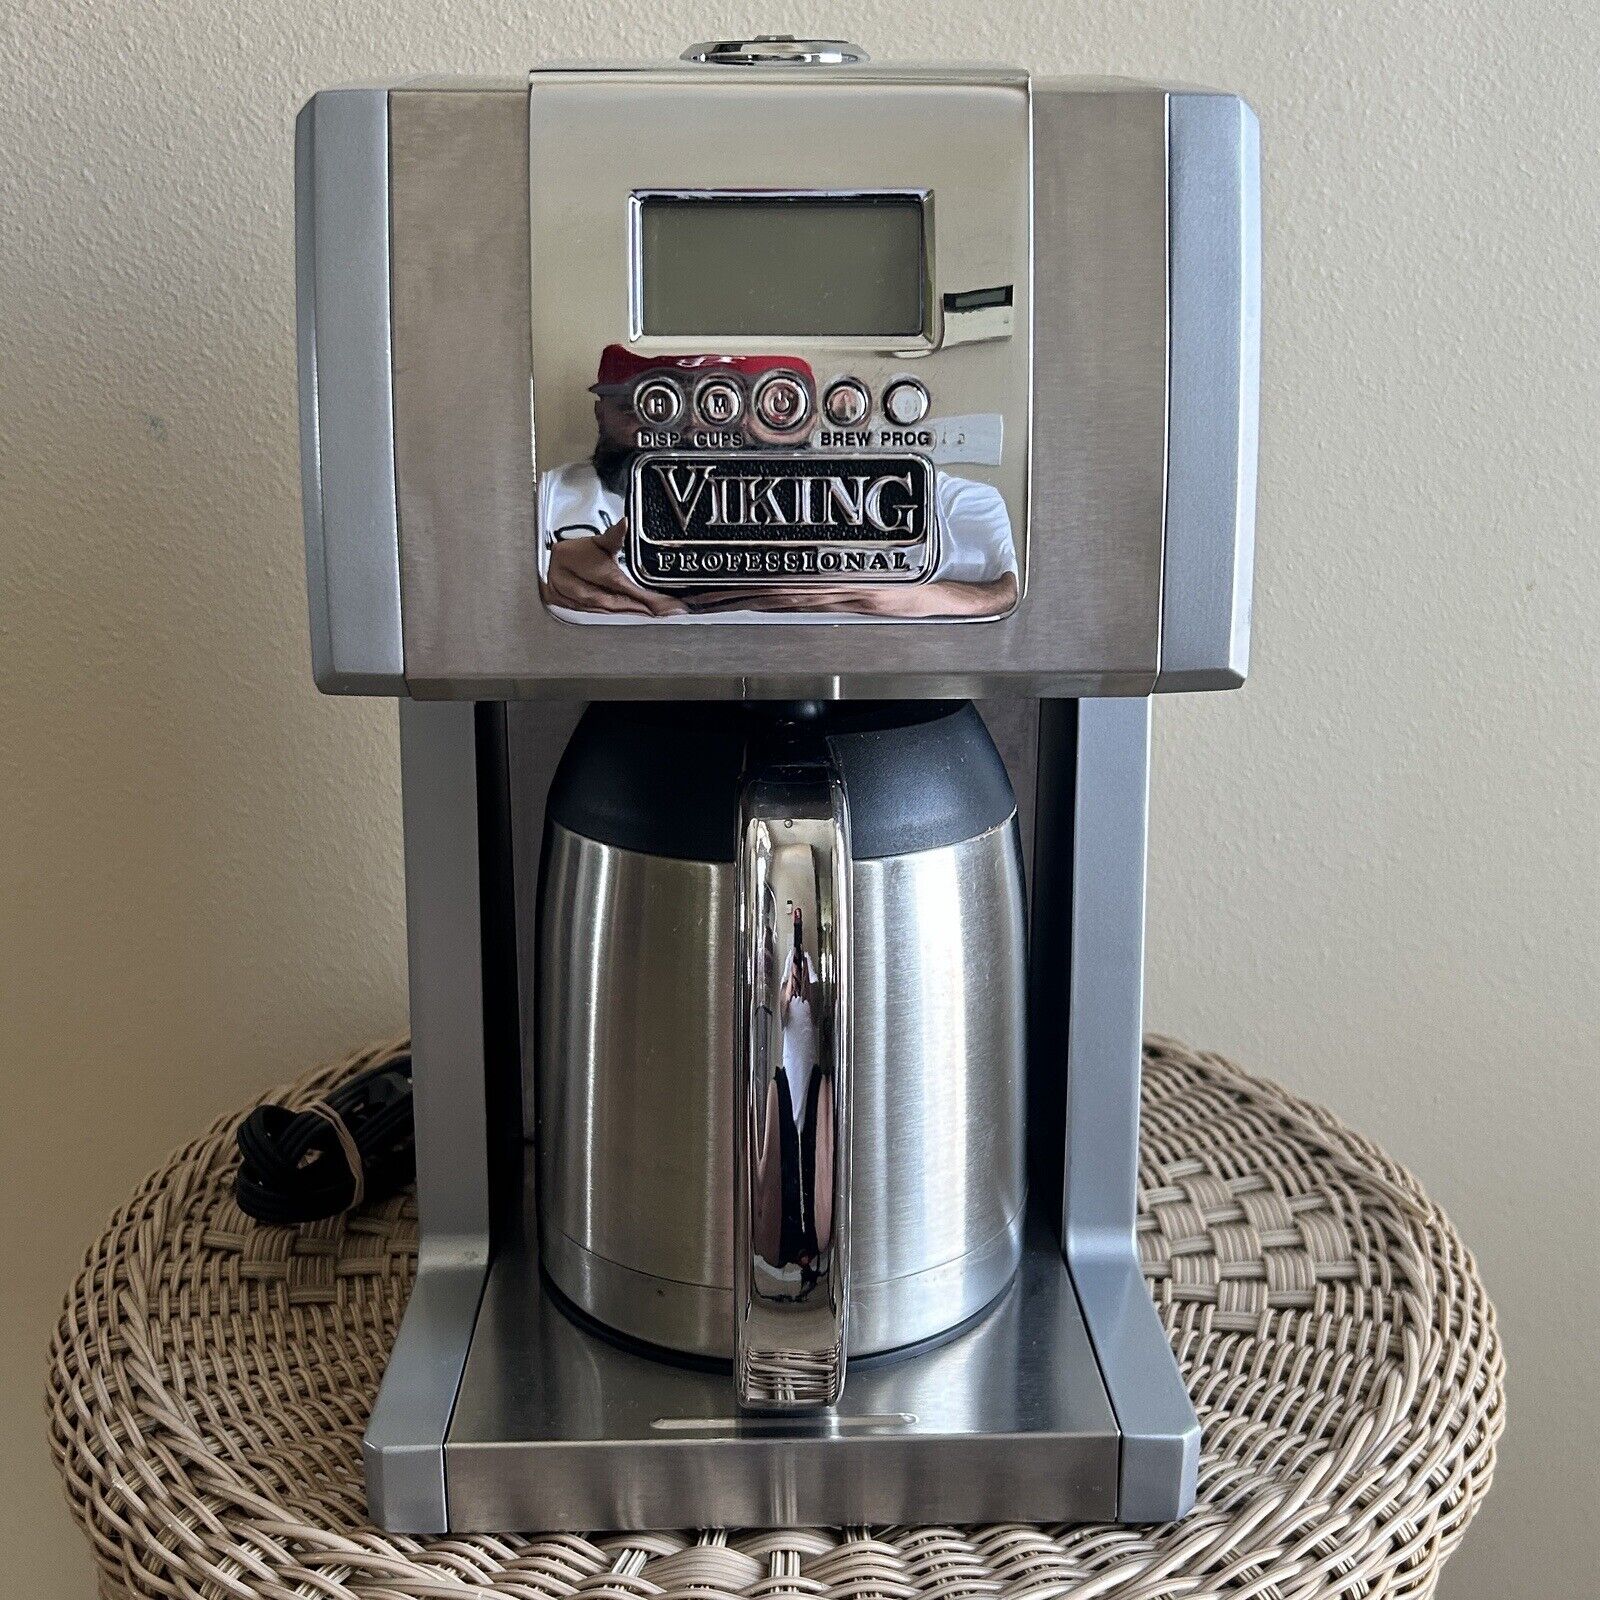 VIKING PROFESSIONAL 12 cup Programmable Coffee Maker. Model #VCCM12MS